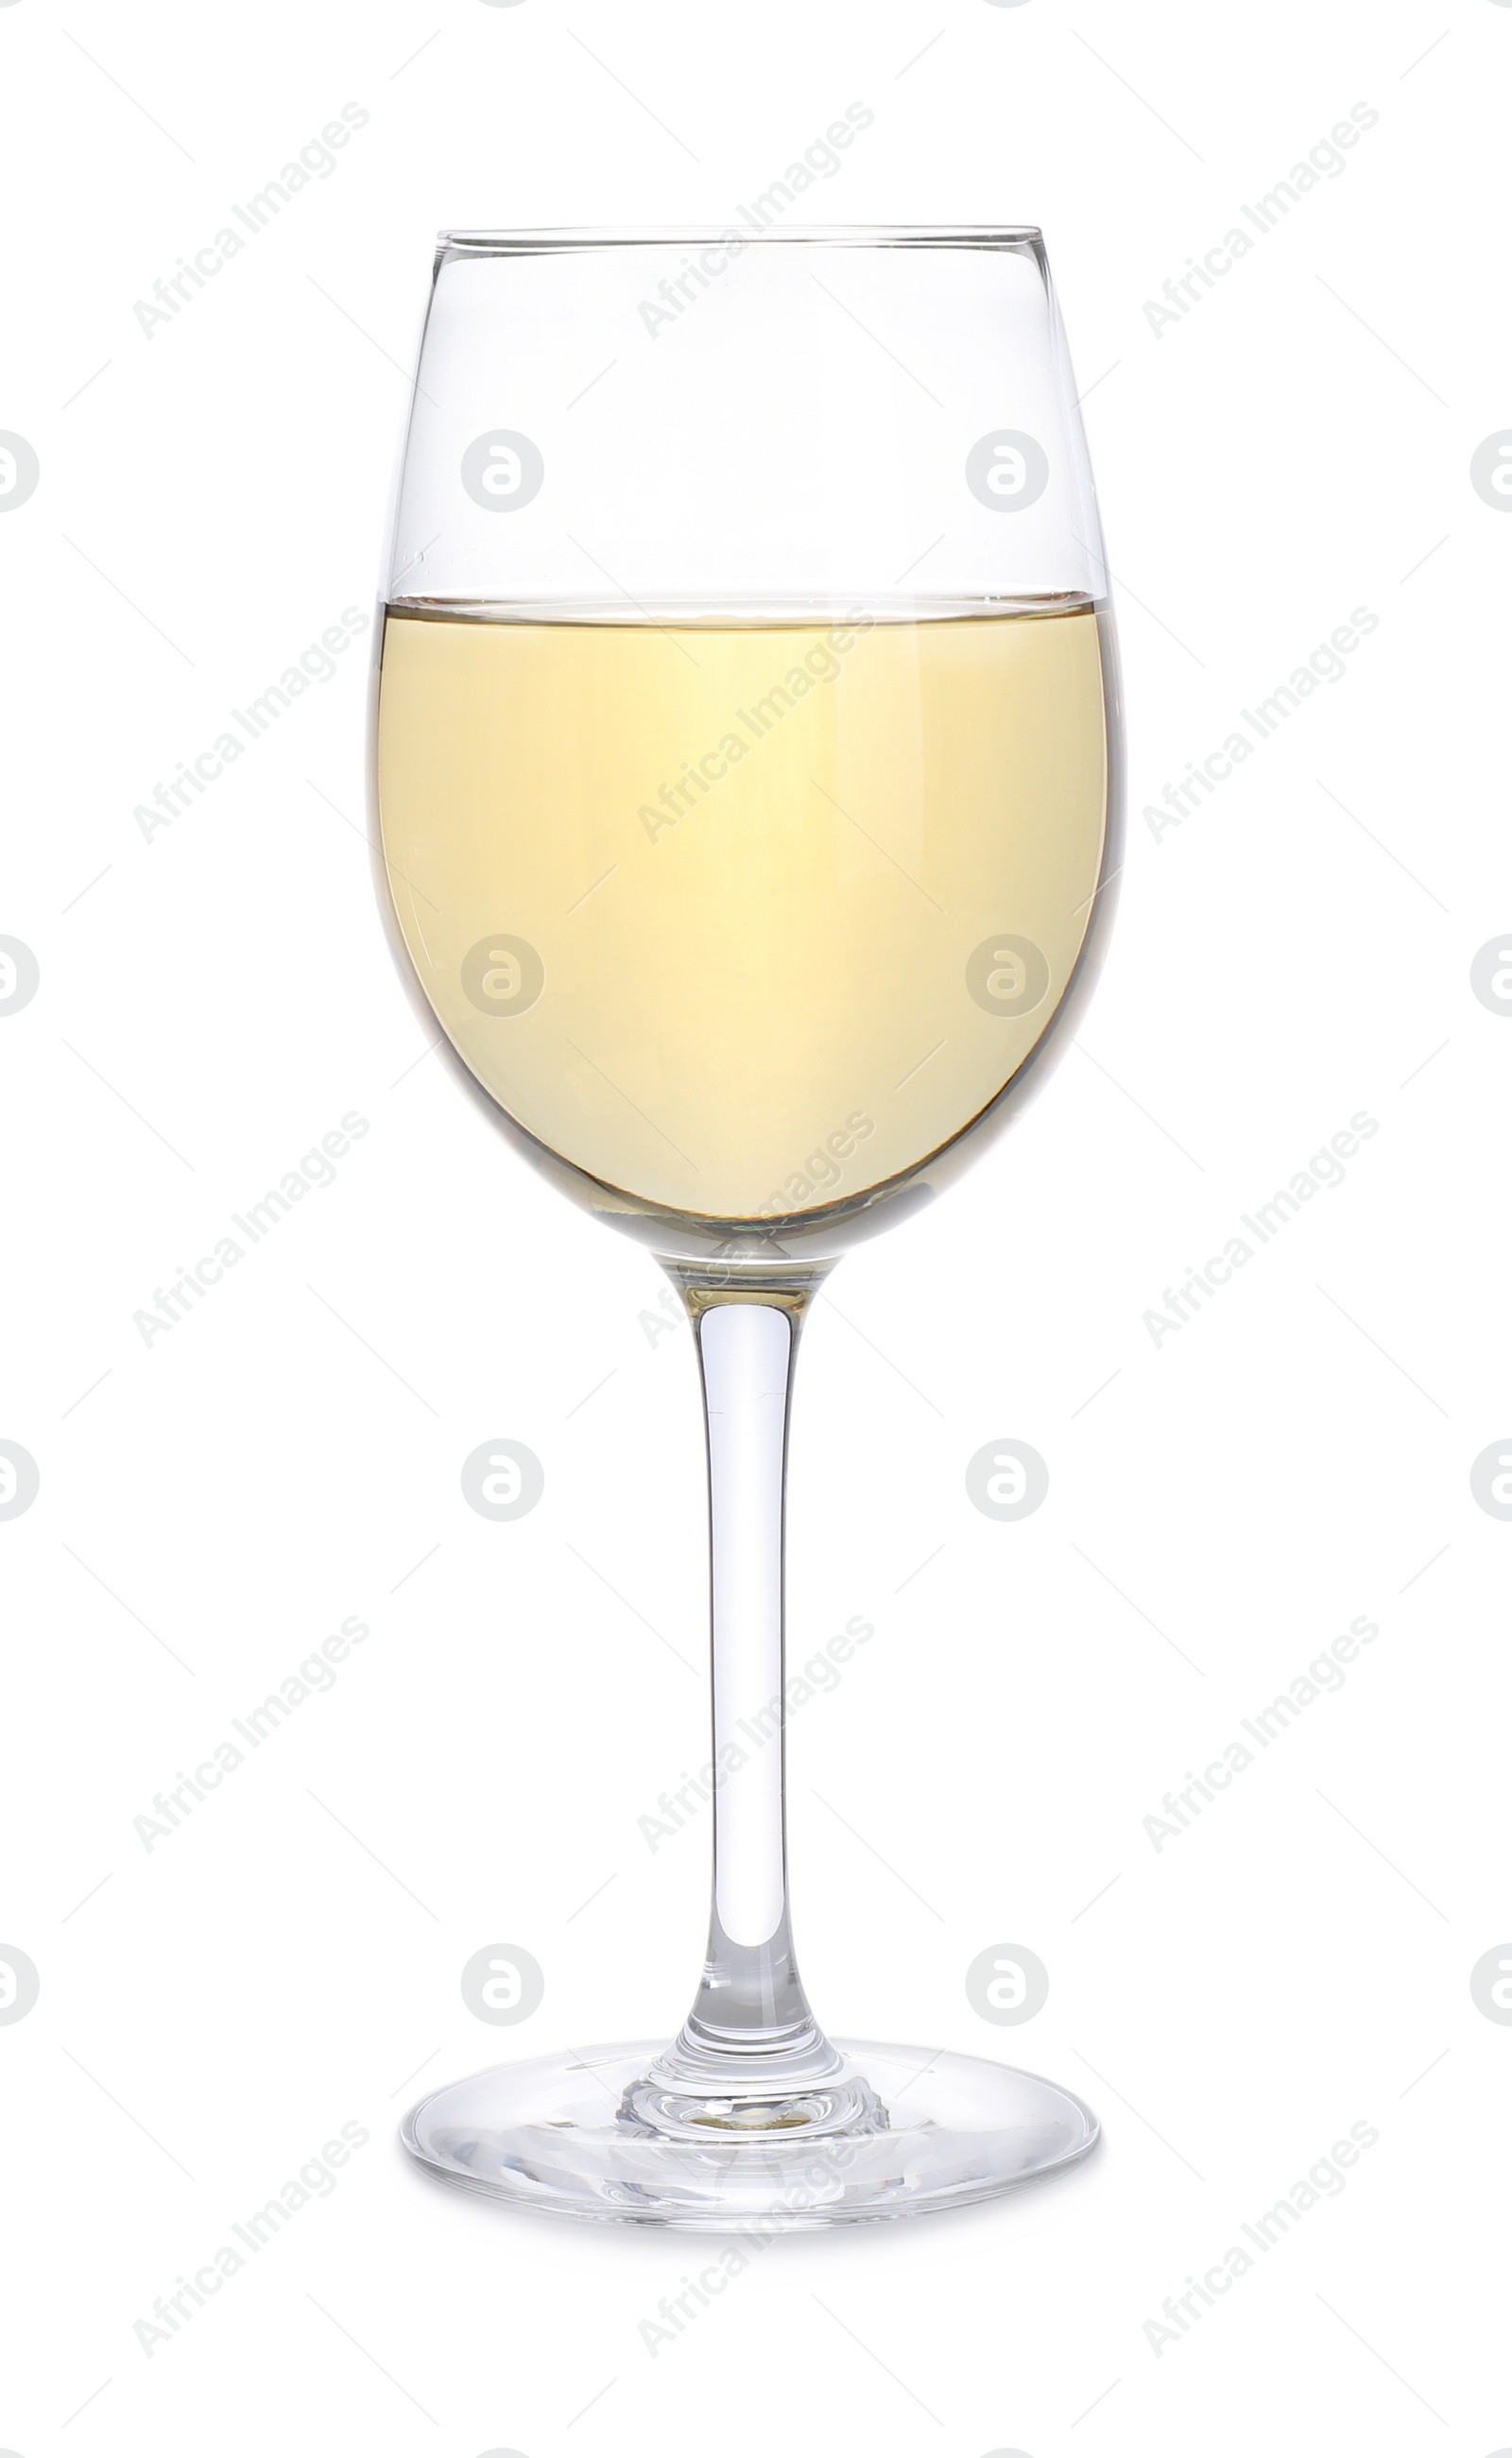 Photo of Crystal clear glass of wine isolated on white